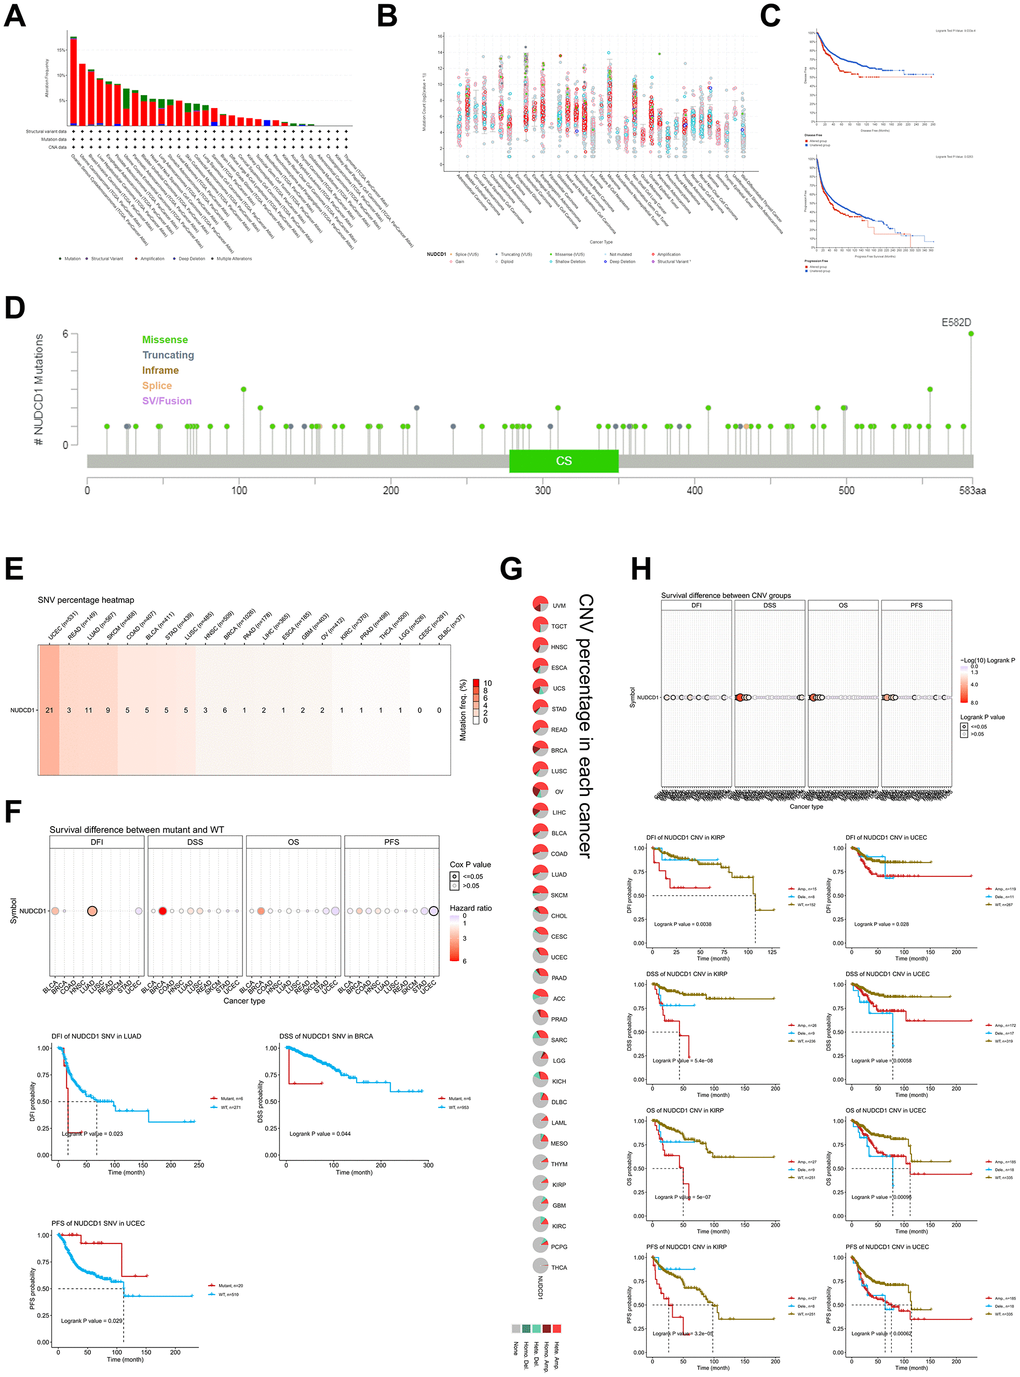 Genetic and epigenetic features of NUDCD1 in different tumors. (A) Alteration frequencies of NUDCD1 across different tumors from cBioPortal. (B) General mutation counts of NUDCD1 in various TCGA cancer types from cBioPortal. (C) Disease free survival (DFS) and progression free survival (PFS) between mutant and WT NUDCD1 in human cancers. (D) Mutation types and sites of NUDCD1 from cBioPortal. (E) SNV (Single Nucleotide Variation) of NUDCD1 in human cancers. The heatmap summarizes the frequency of deleterious mutations (data from GSCA). (F) Survival differences between mutant and WT NUDCD1 in human cancers (data from GSCA). (G) CNV (Copy Number Variation) of NUDCD1 in each cancer type. A global profile for heterozygous/homozygous CNV of NUDCD1 in each cancer (data from GSCA). (H) Survival differences between CNV and WT NUDCD1 in each cancer type (data from GSCA).